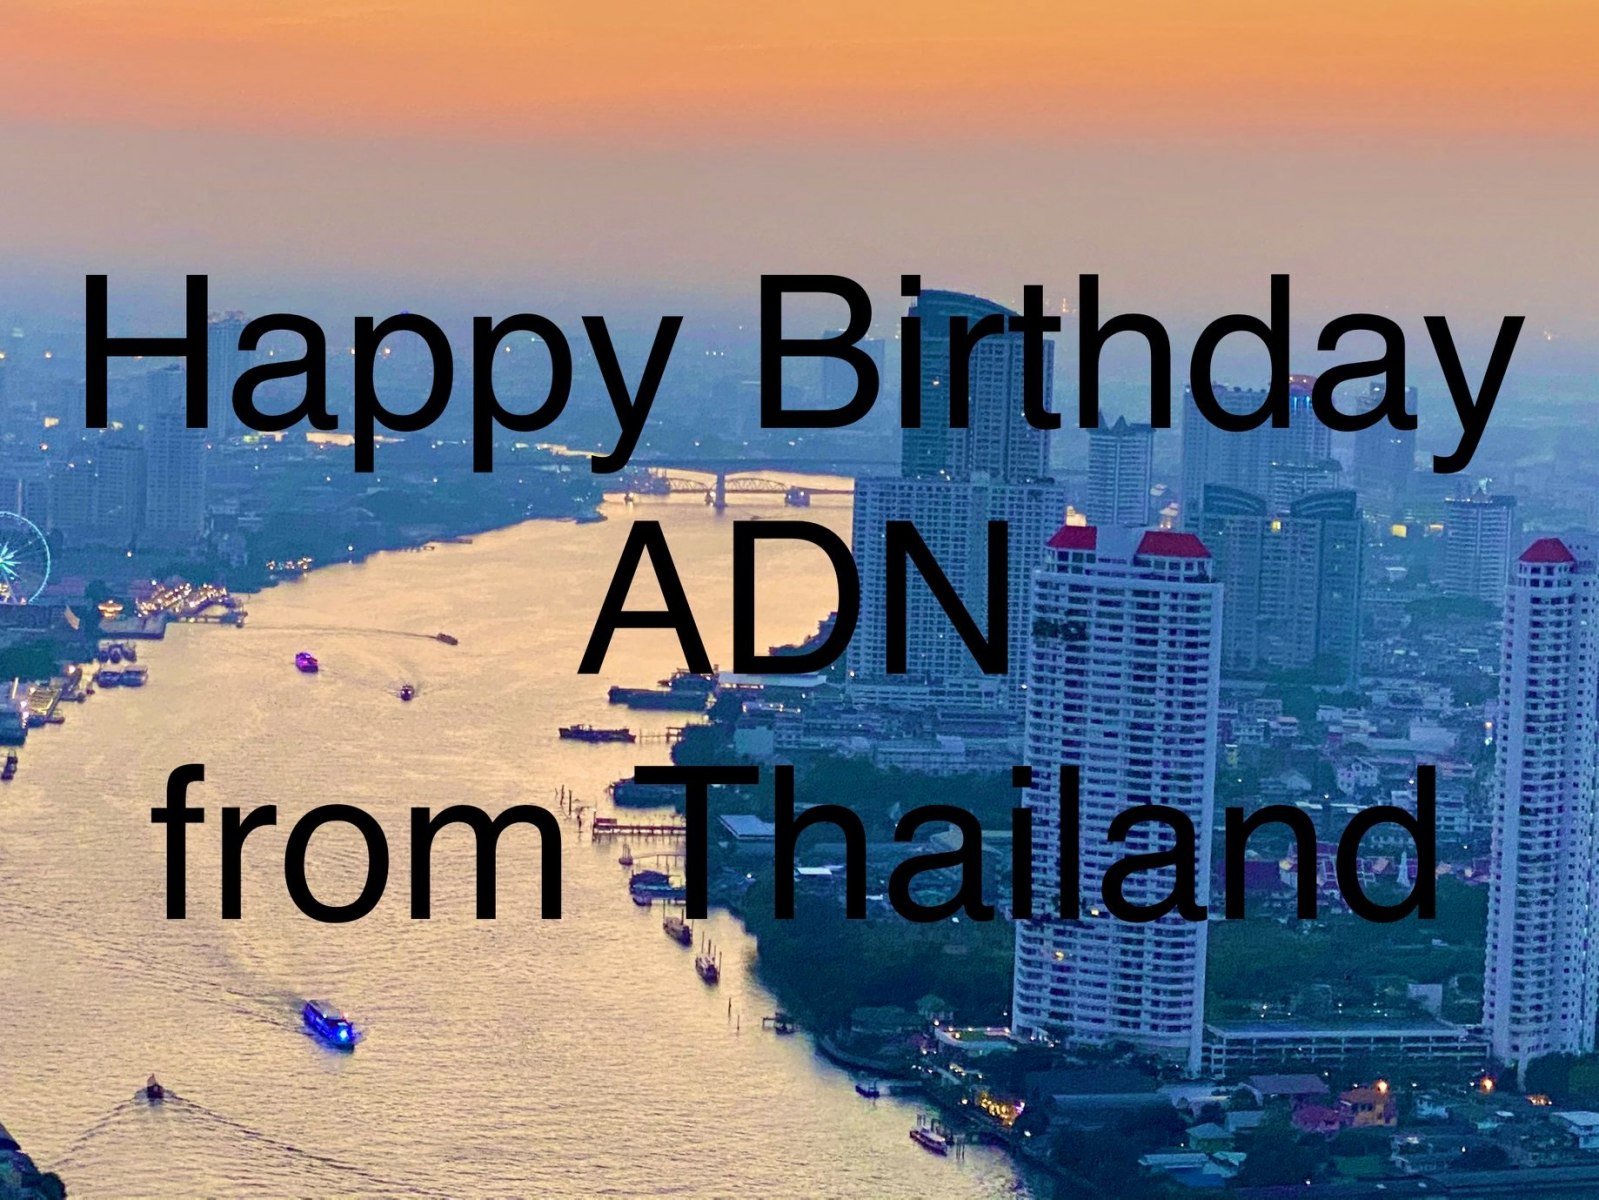 Birthday Wishes from Thailand